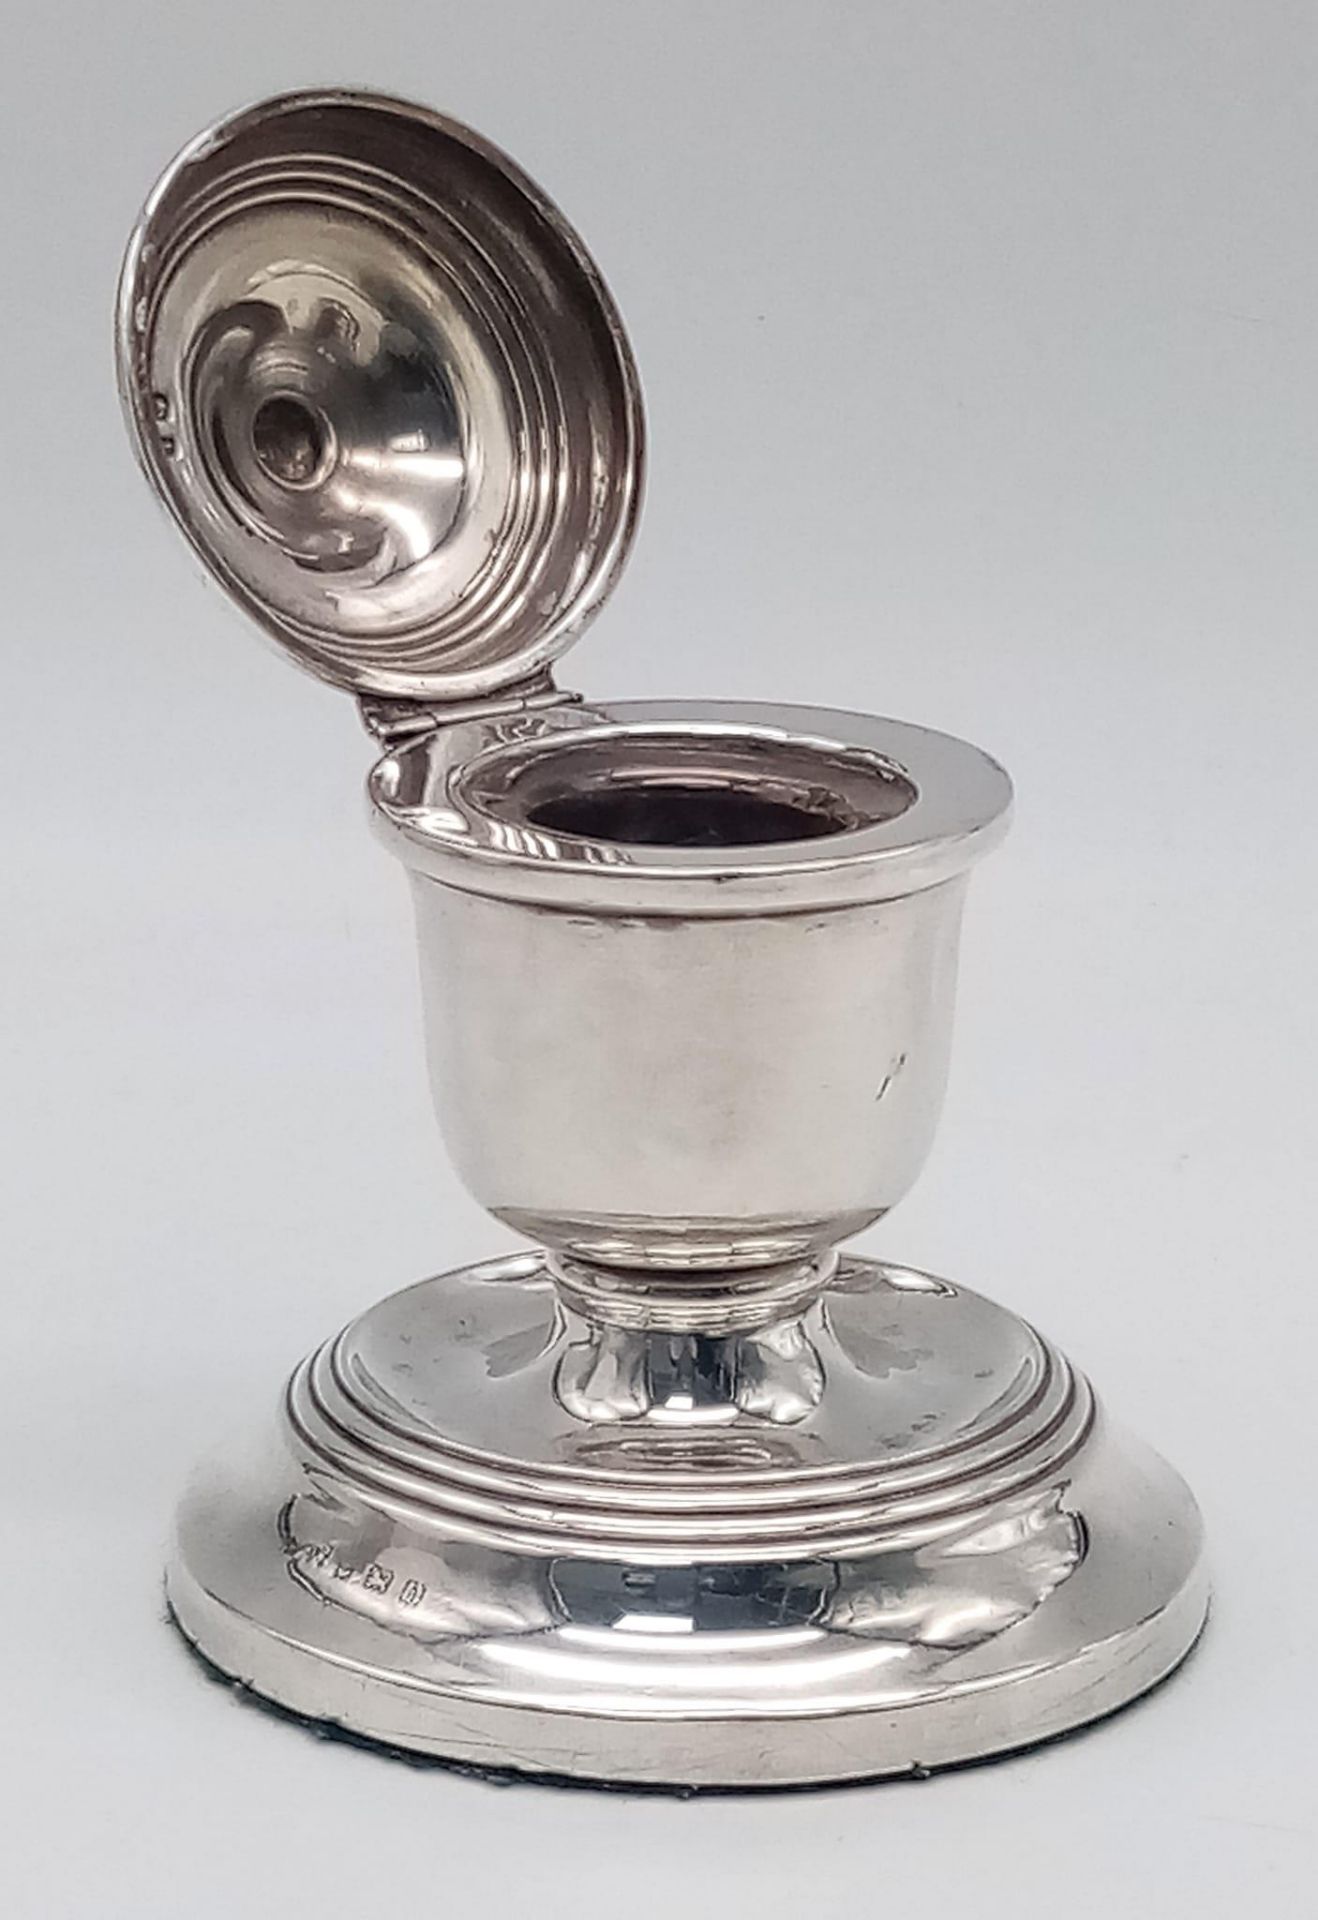 An Antique Sterling Silver Inkwell. Hallmarks for Birmingham 1908. Weighted - total weight 193g.